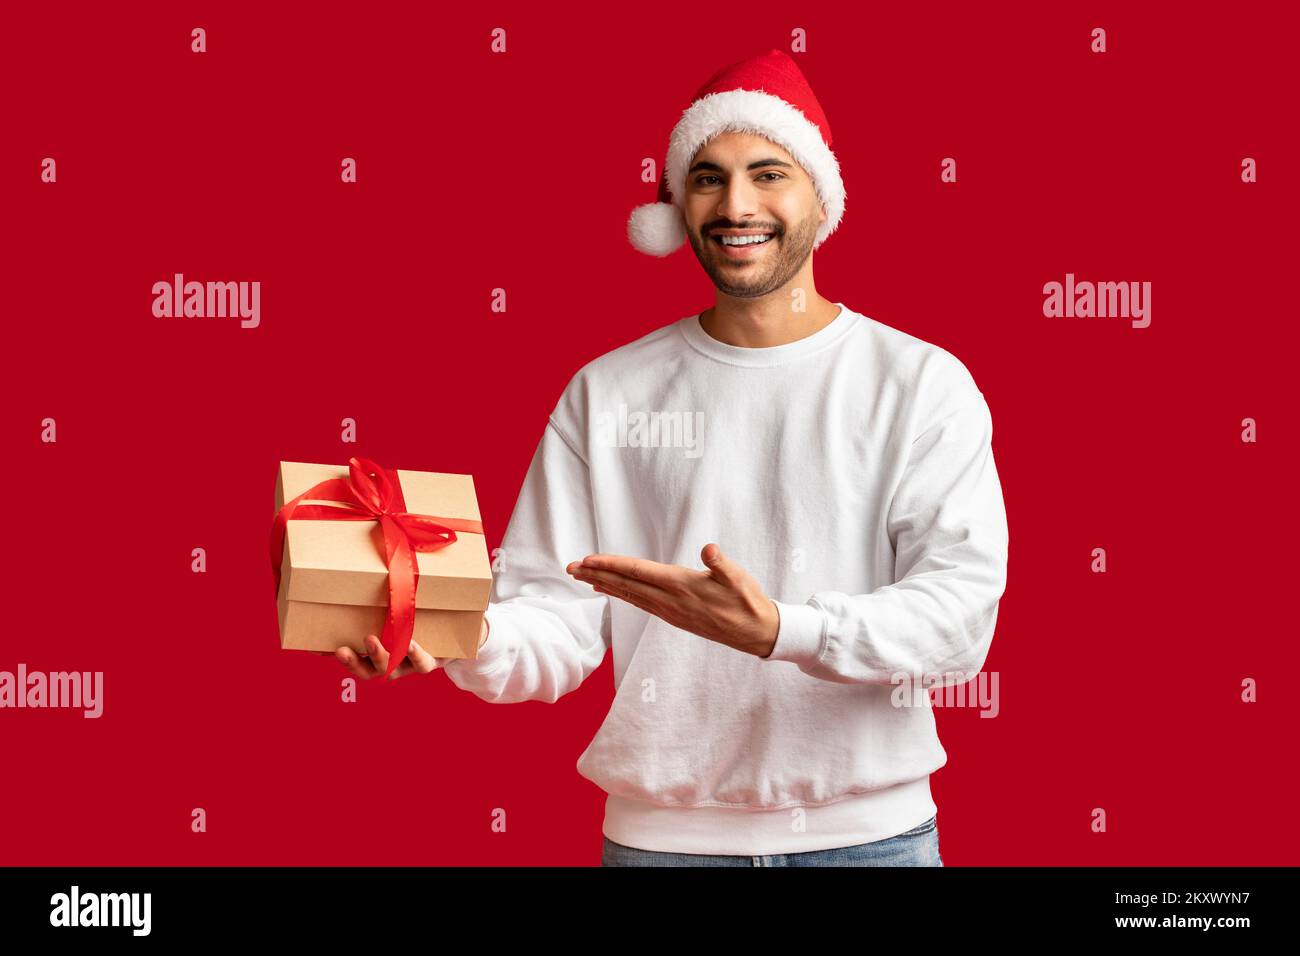 Xmas Offer. Handsome Arab Man In Santa Hat Pointing At Gift Box Stock Photo